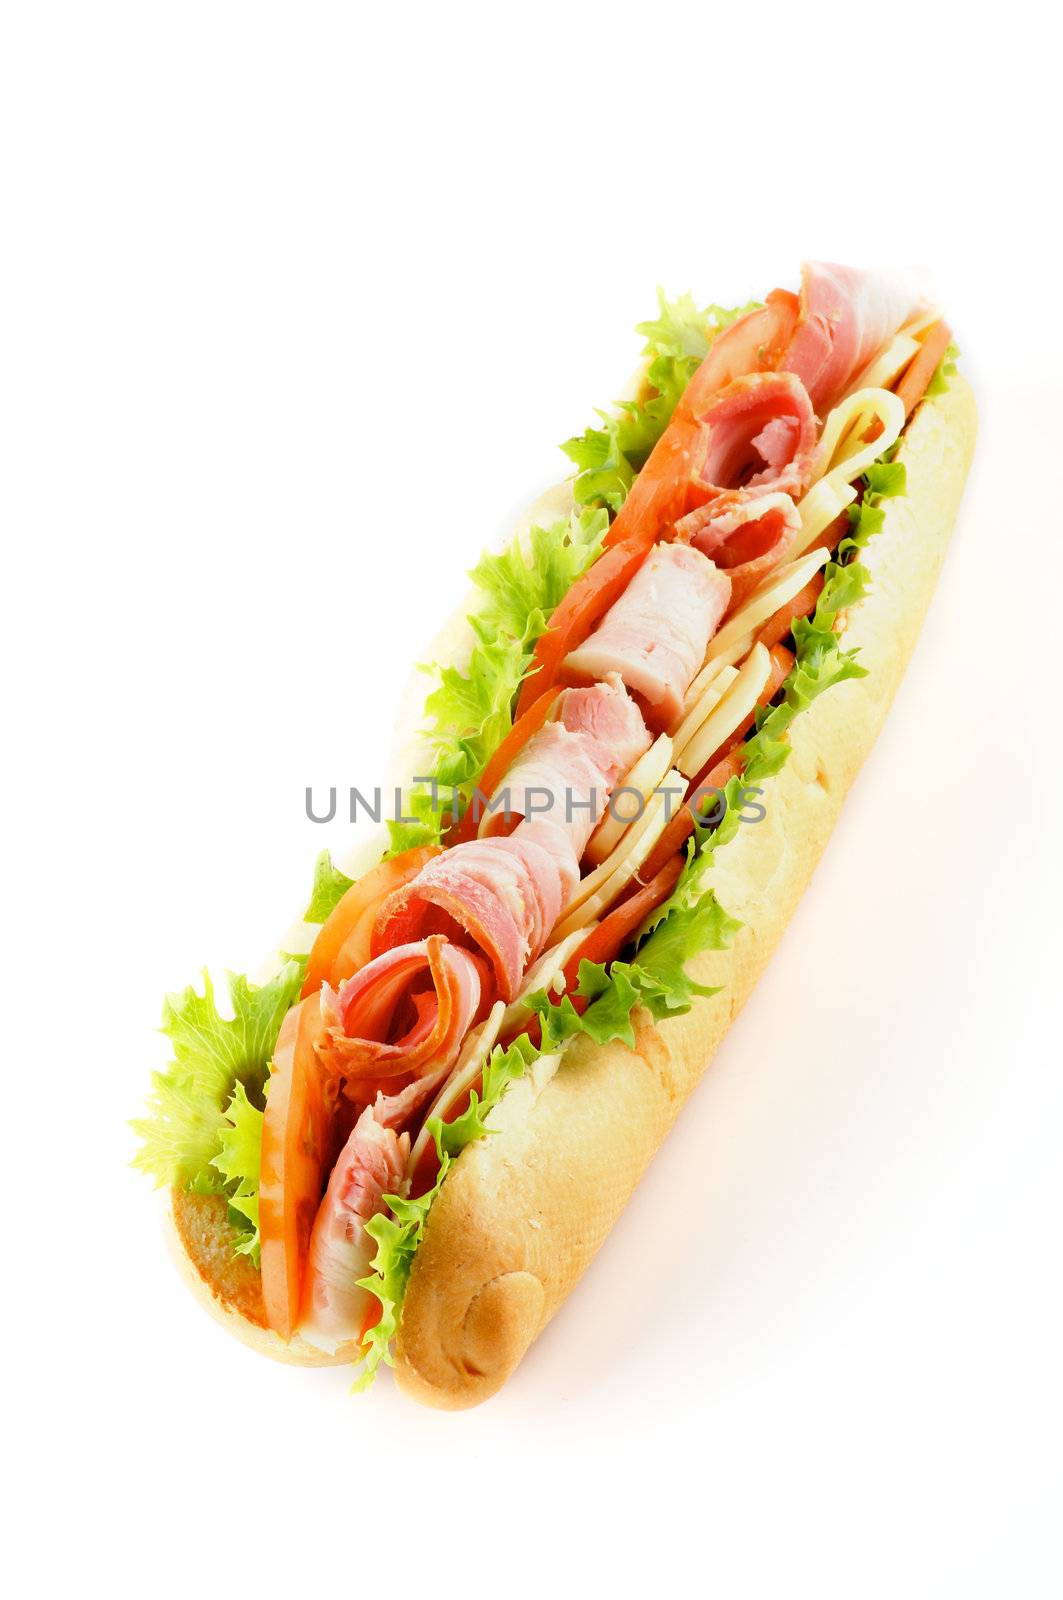 Long Baguette Sandwich with Lettuce, Tomatoes, Cheese and Ham isolated on white background